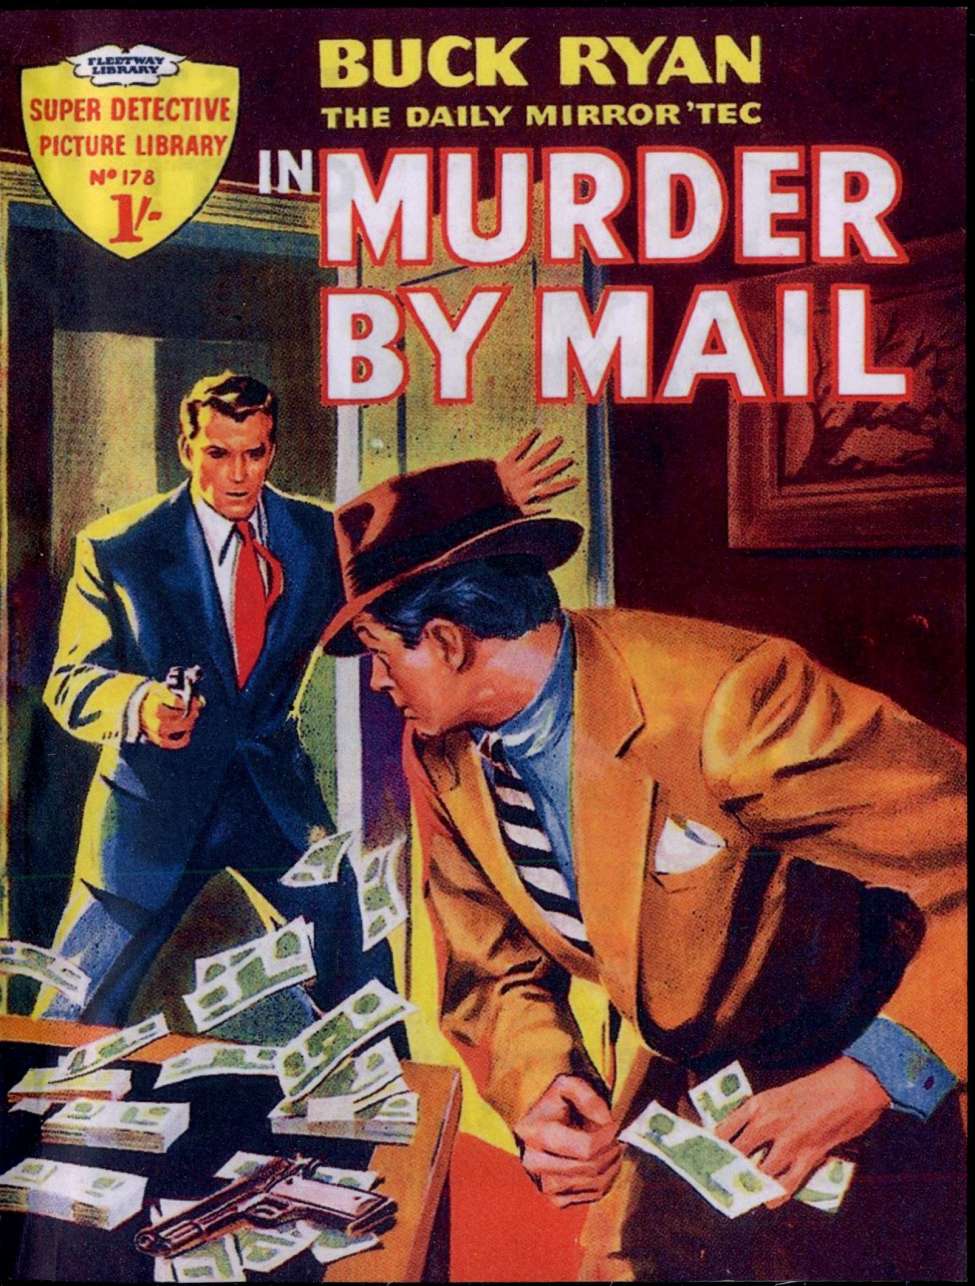 Book Cover For Super Detective Library 178 - Buck Ryan in Murder By Mail